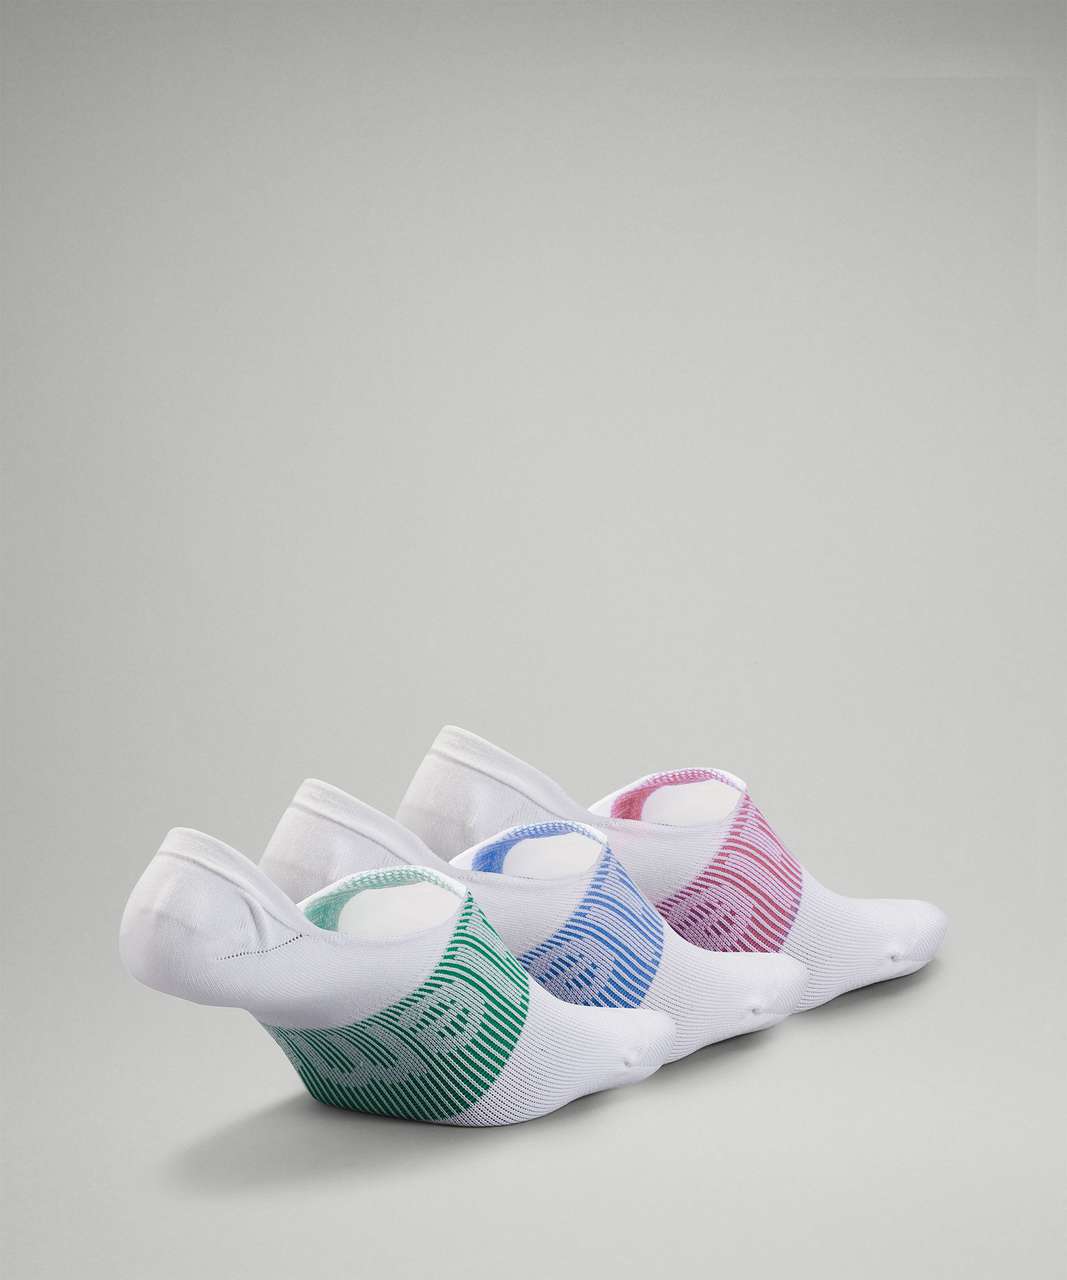 Lululemon Daily Stride No-Show Sock 3 Pack - Emerald Ice / Blue Nile / Pink Blossom